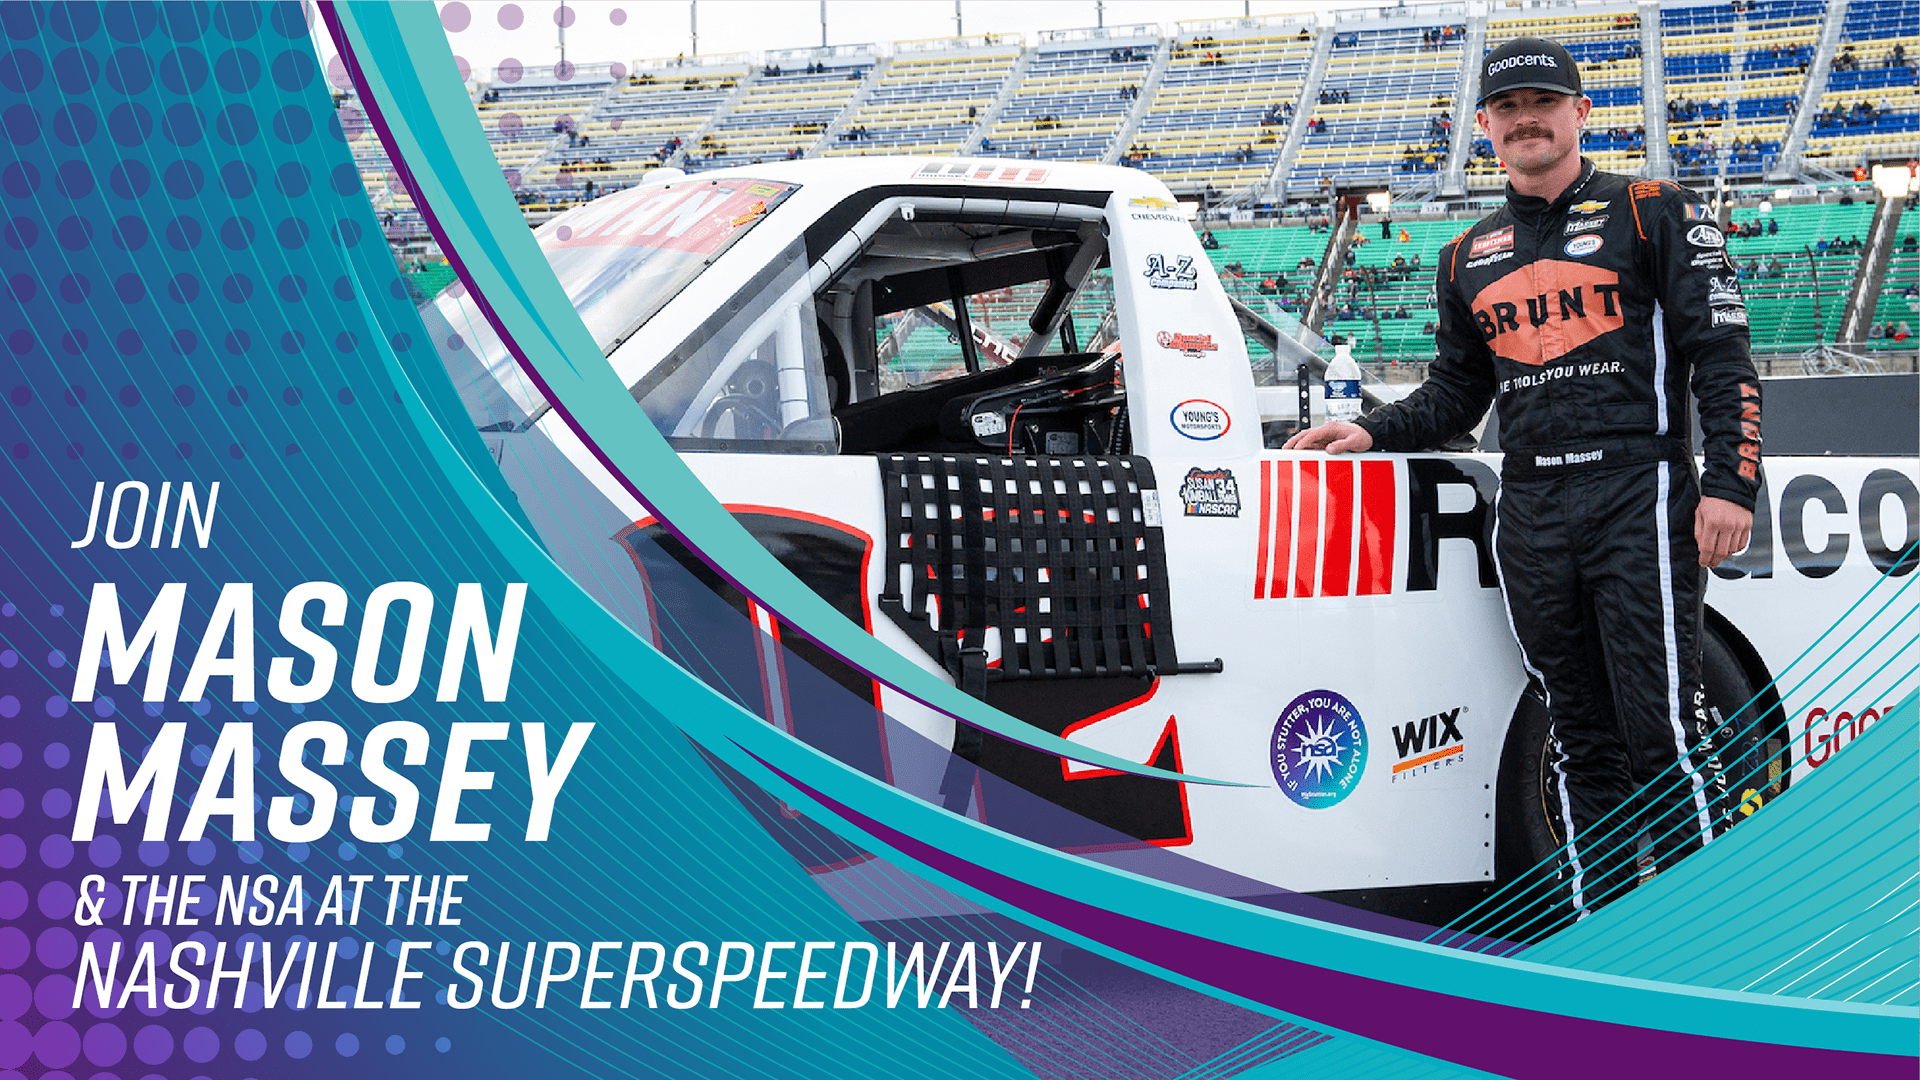 A racing driver stands next to a race truck, posing and smiling for a photo. The text on the image reads, "Join Mason Massey & the NSA at the Nashville Superspeedway!" The background features the race track and stands. Various sponsor logos are visible on the truck and suit.